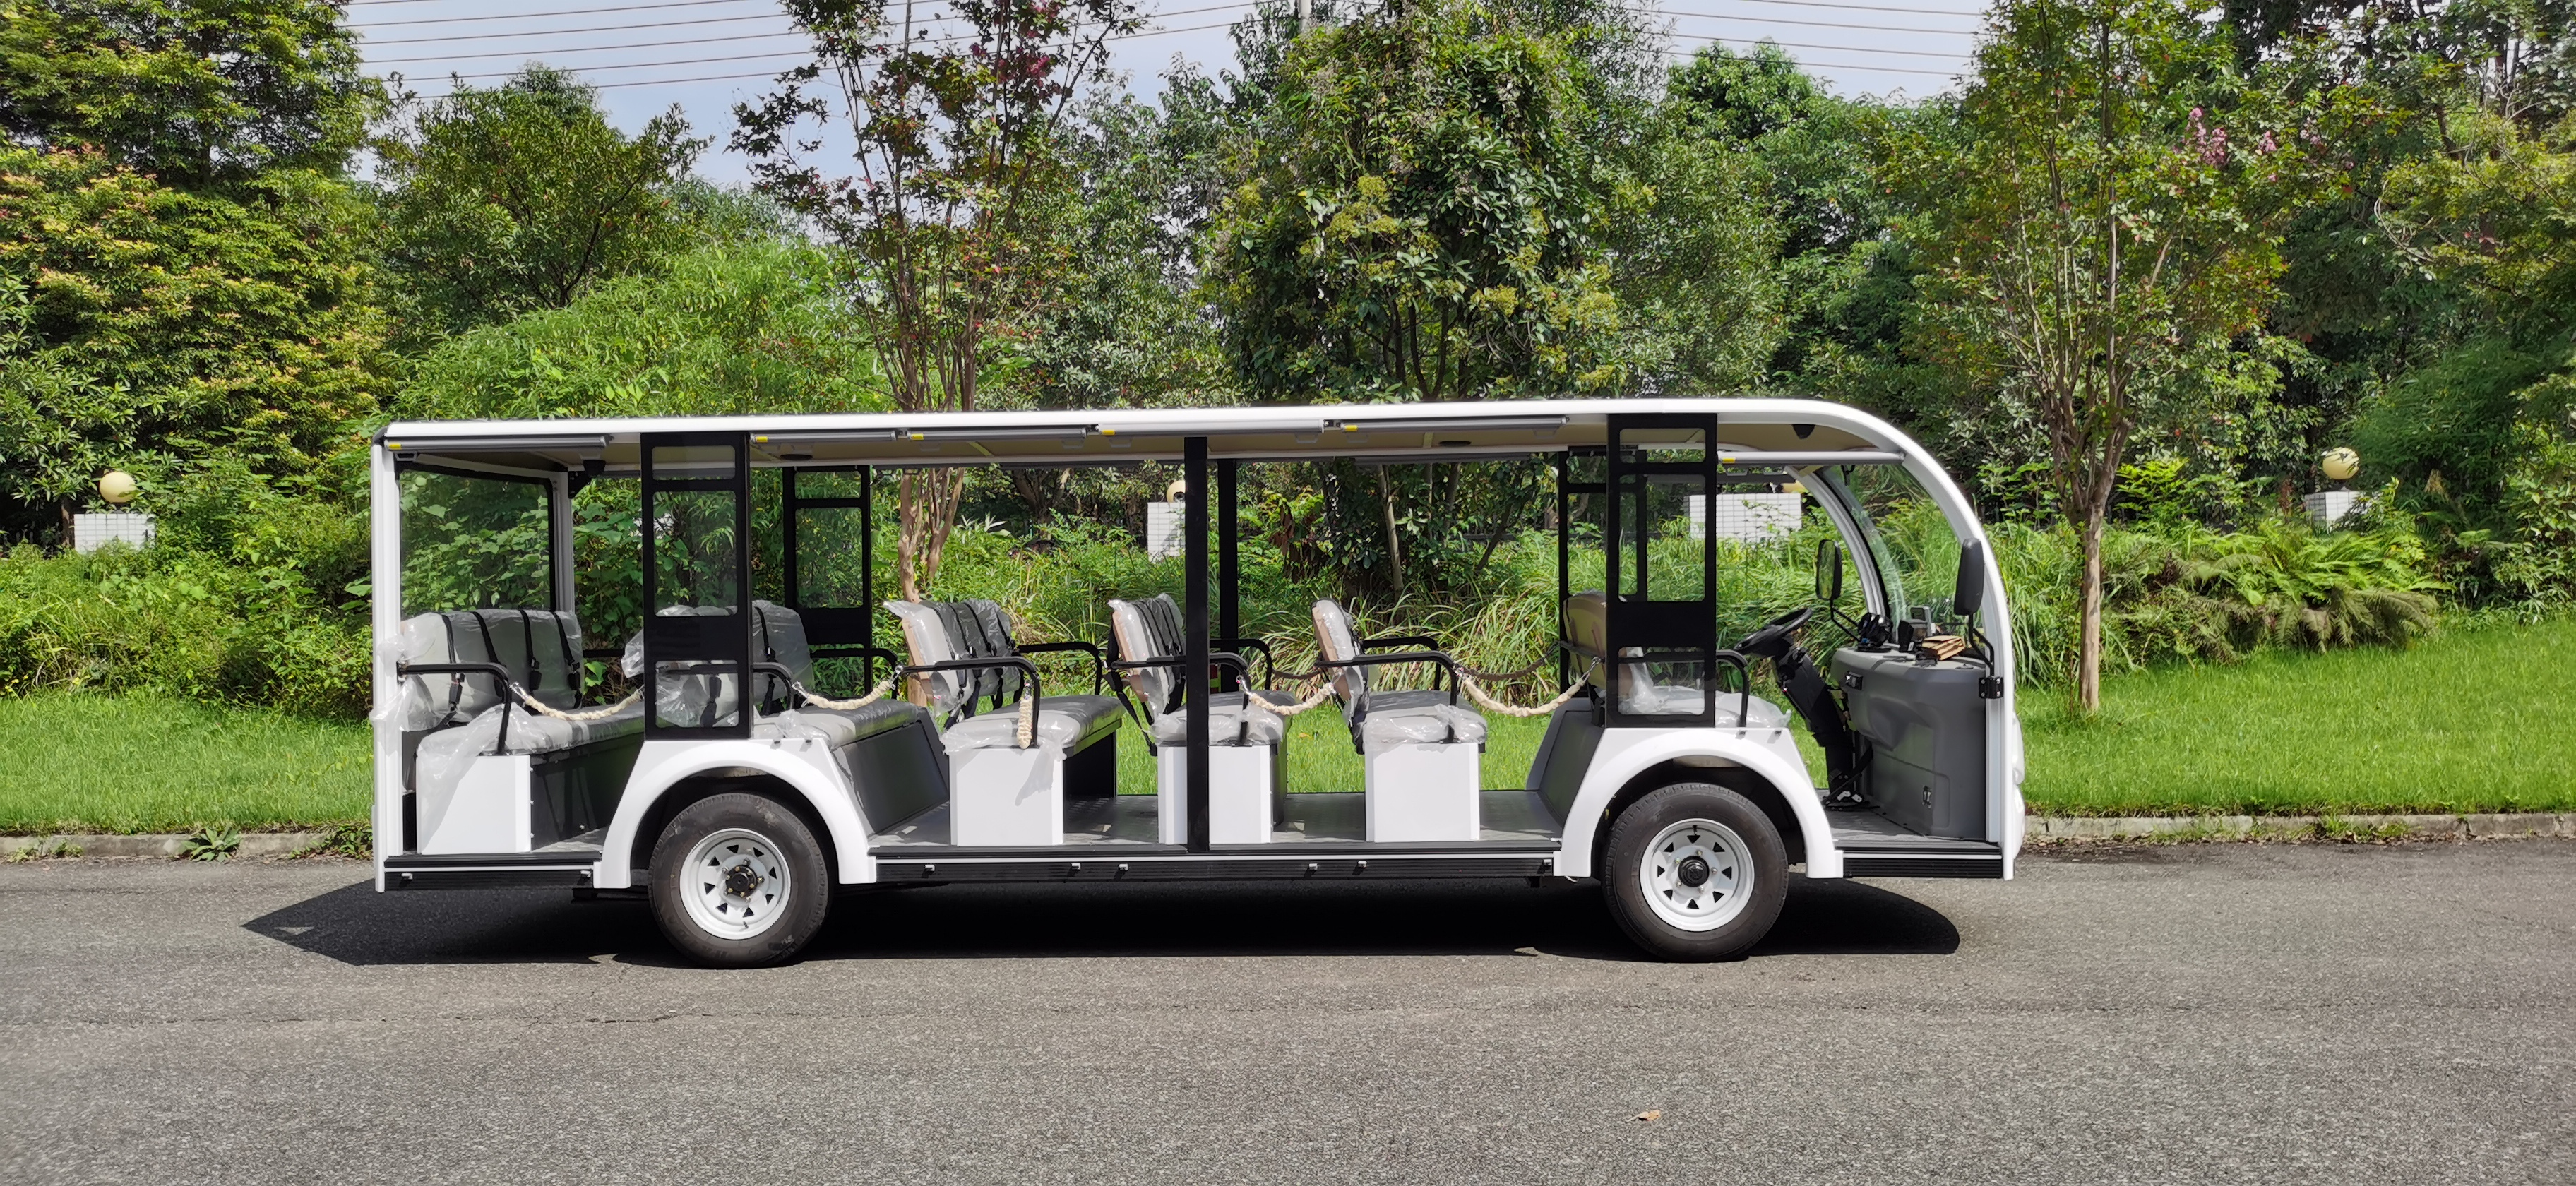 Hainan Haikou Sanya Scenic Spot Electric Sightseeing Bus 23 New Energy Sightseeing Bus Customized by the Manufacturer